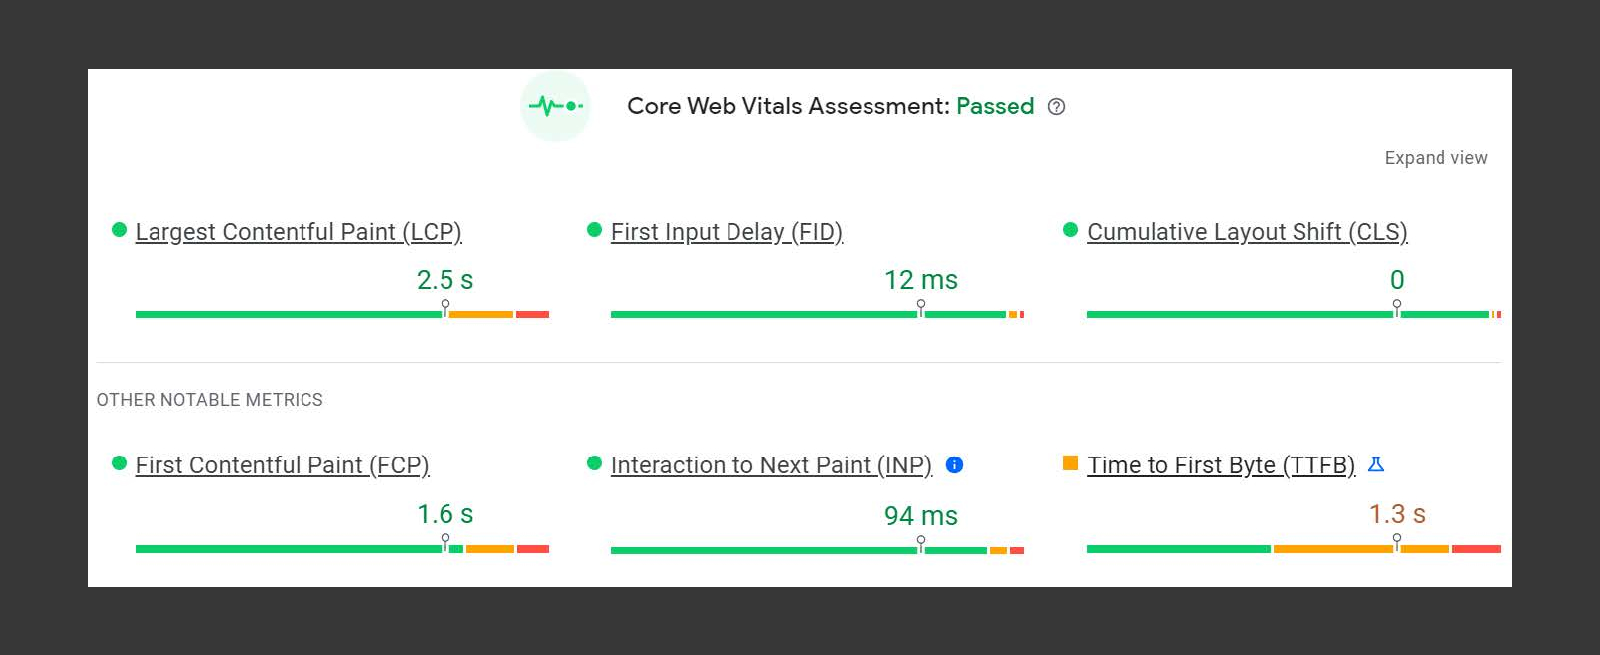 Screenshot of Core Web Vitals assessment displaying metrics: Largest Contentful Paint 2.5s, First Input Delay 12ms, Cumulative Layout Shift 0, First Contentful Paint 1.6s, Interaction to Next Paint 94ms, Time to First Byte 1.3s.